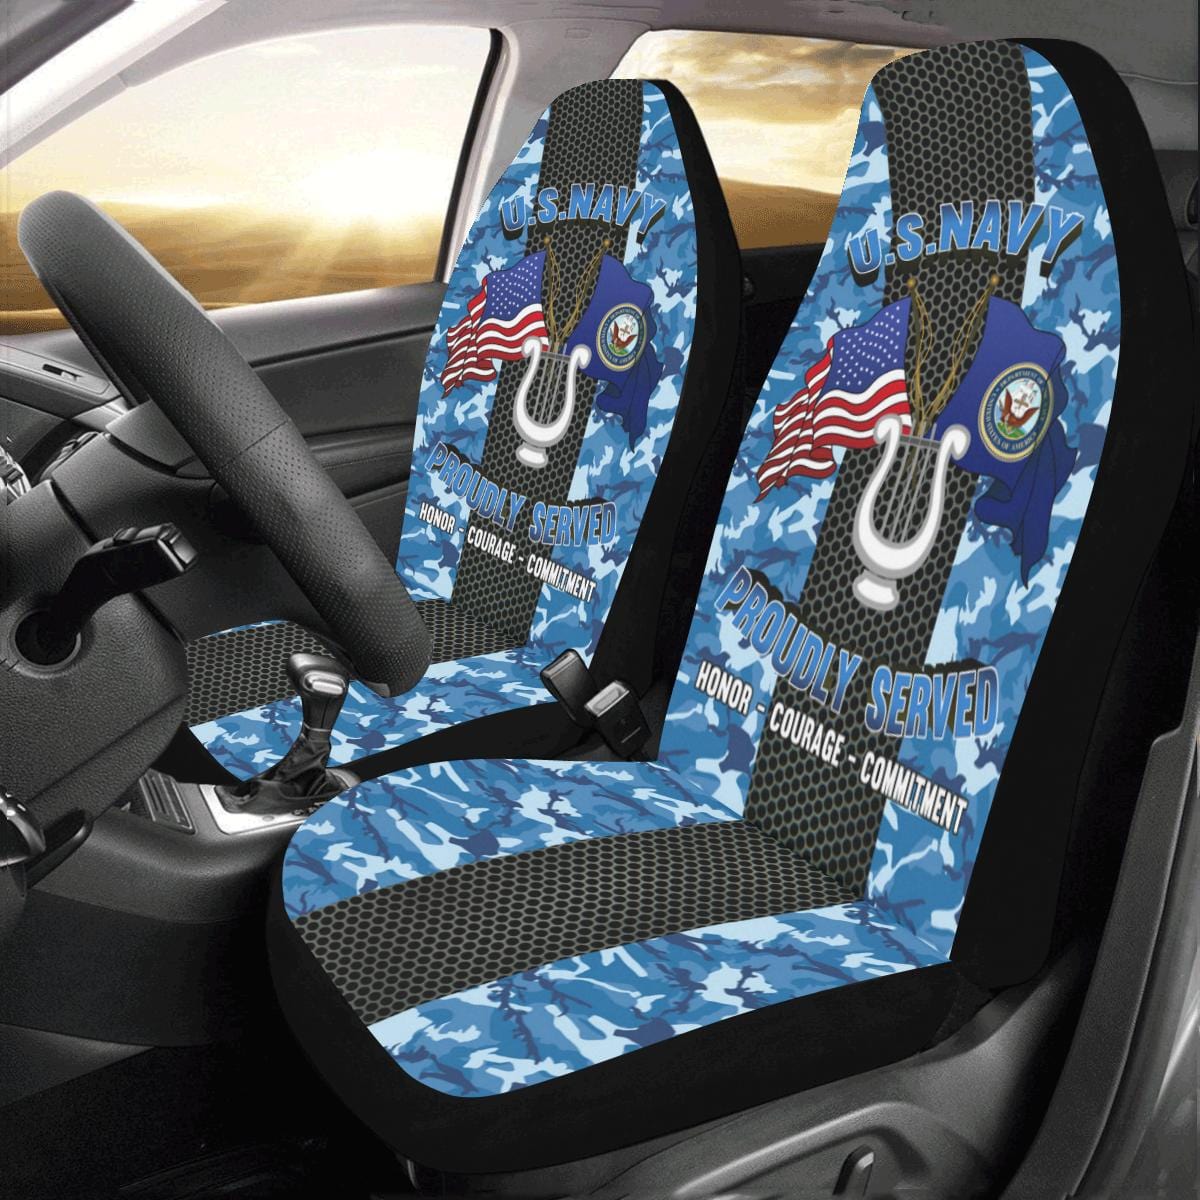 Navy Musician Navy MU Car Seat Covers (Set of 2)-SeatCovers-Navy-Rate-Veterans Nation